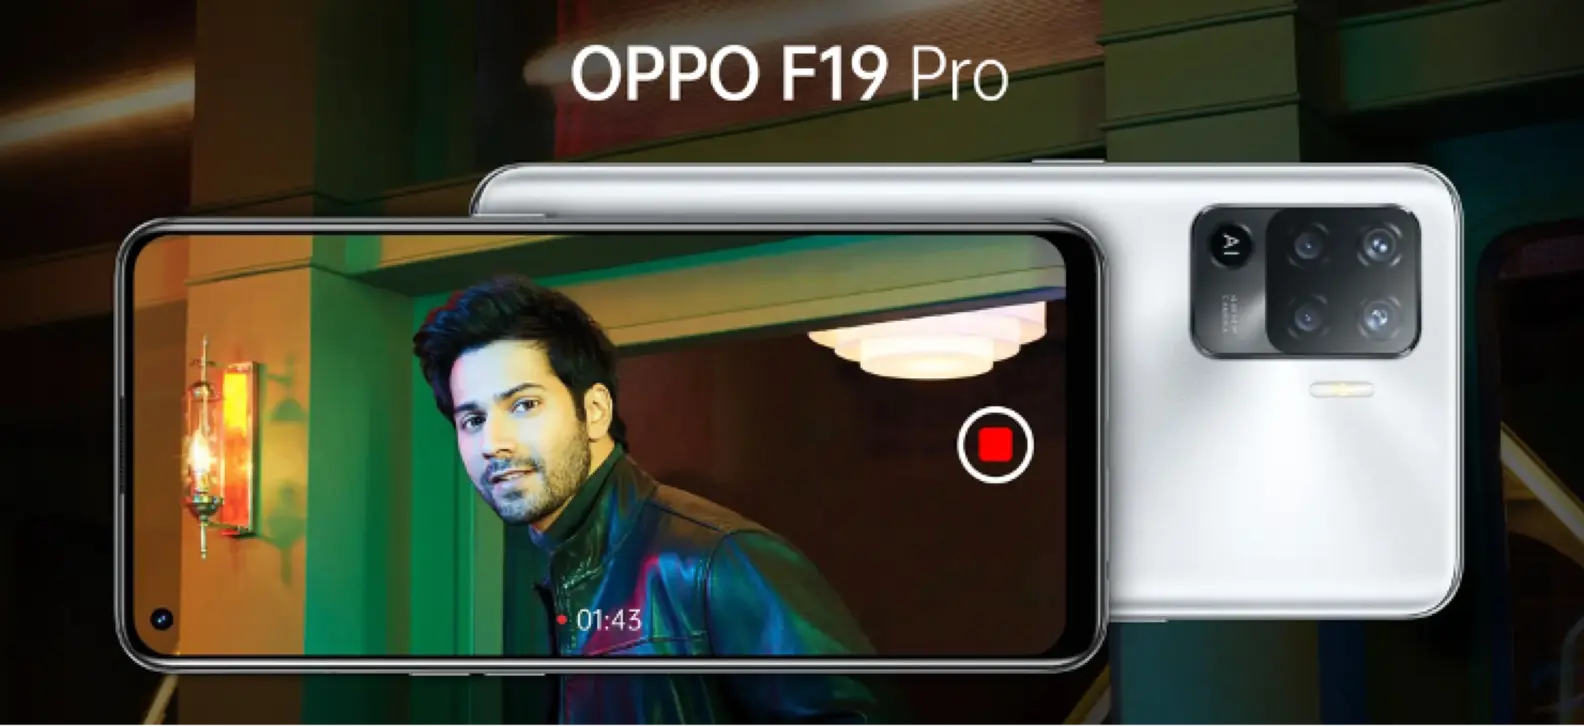 The OPPO F19 Pro, Packed with Super Performing Specs!